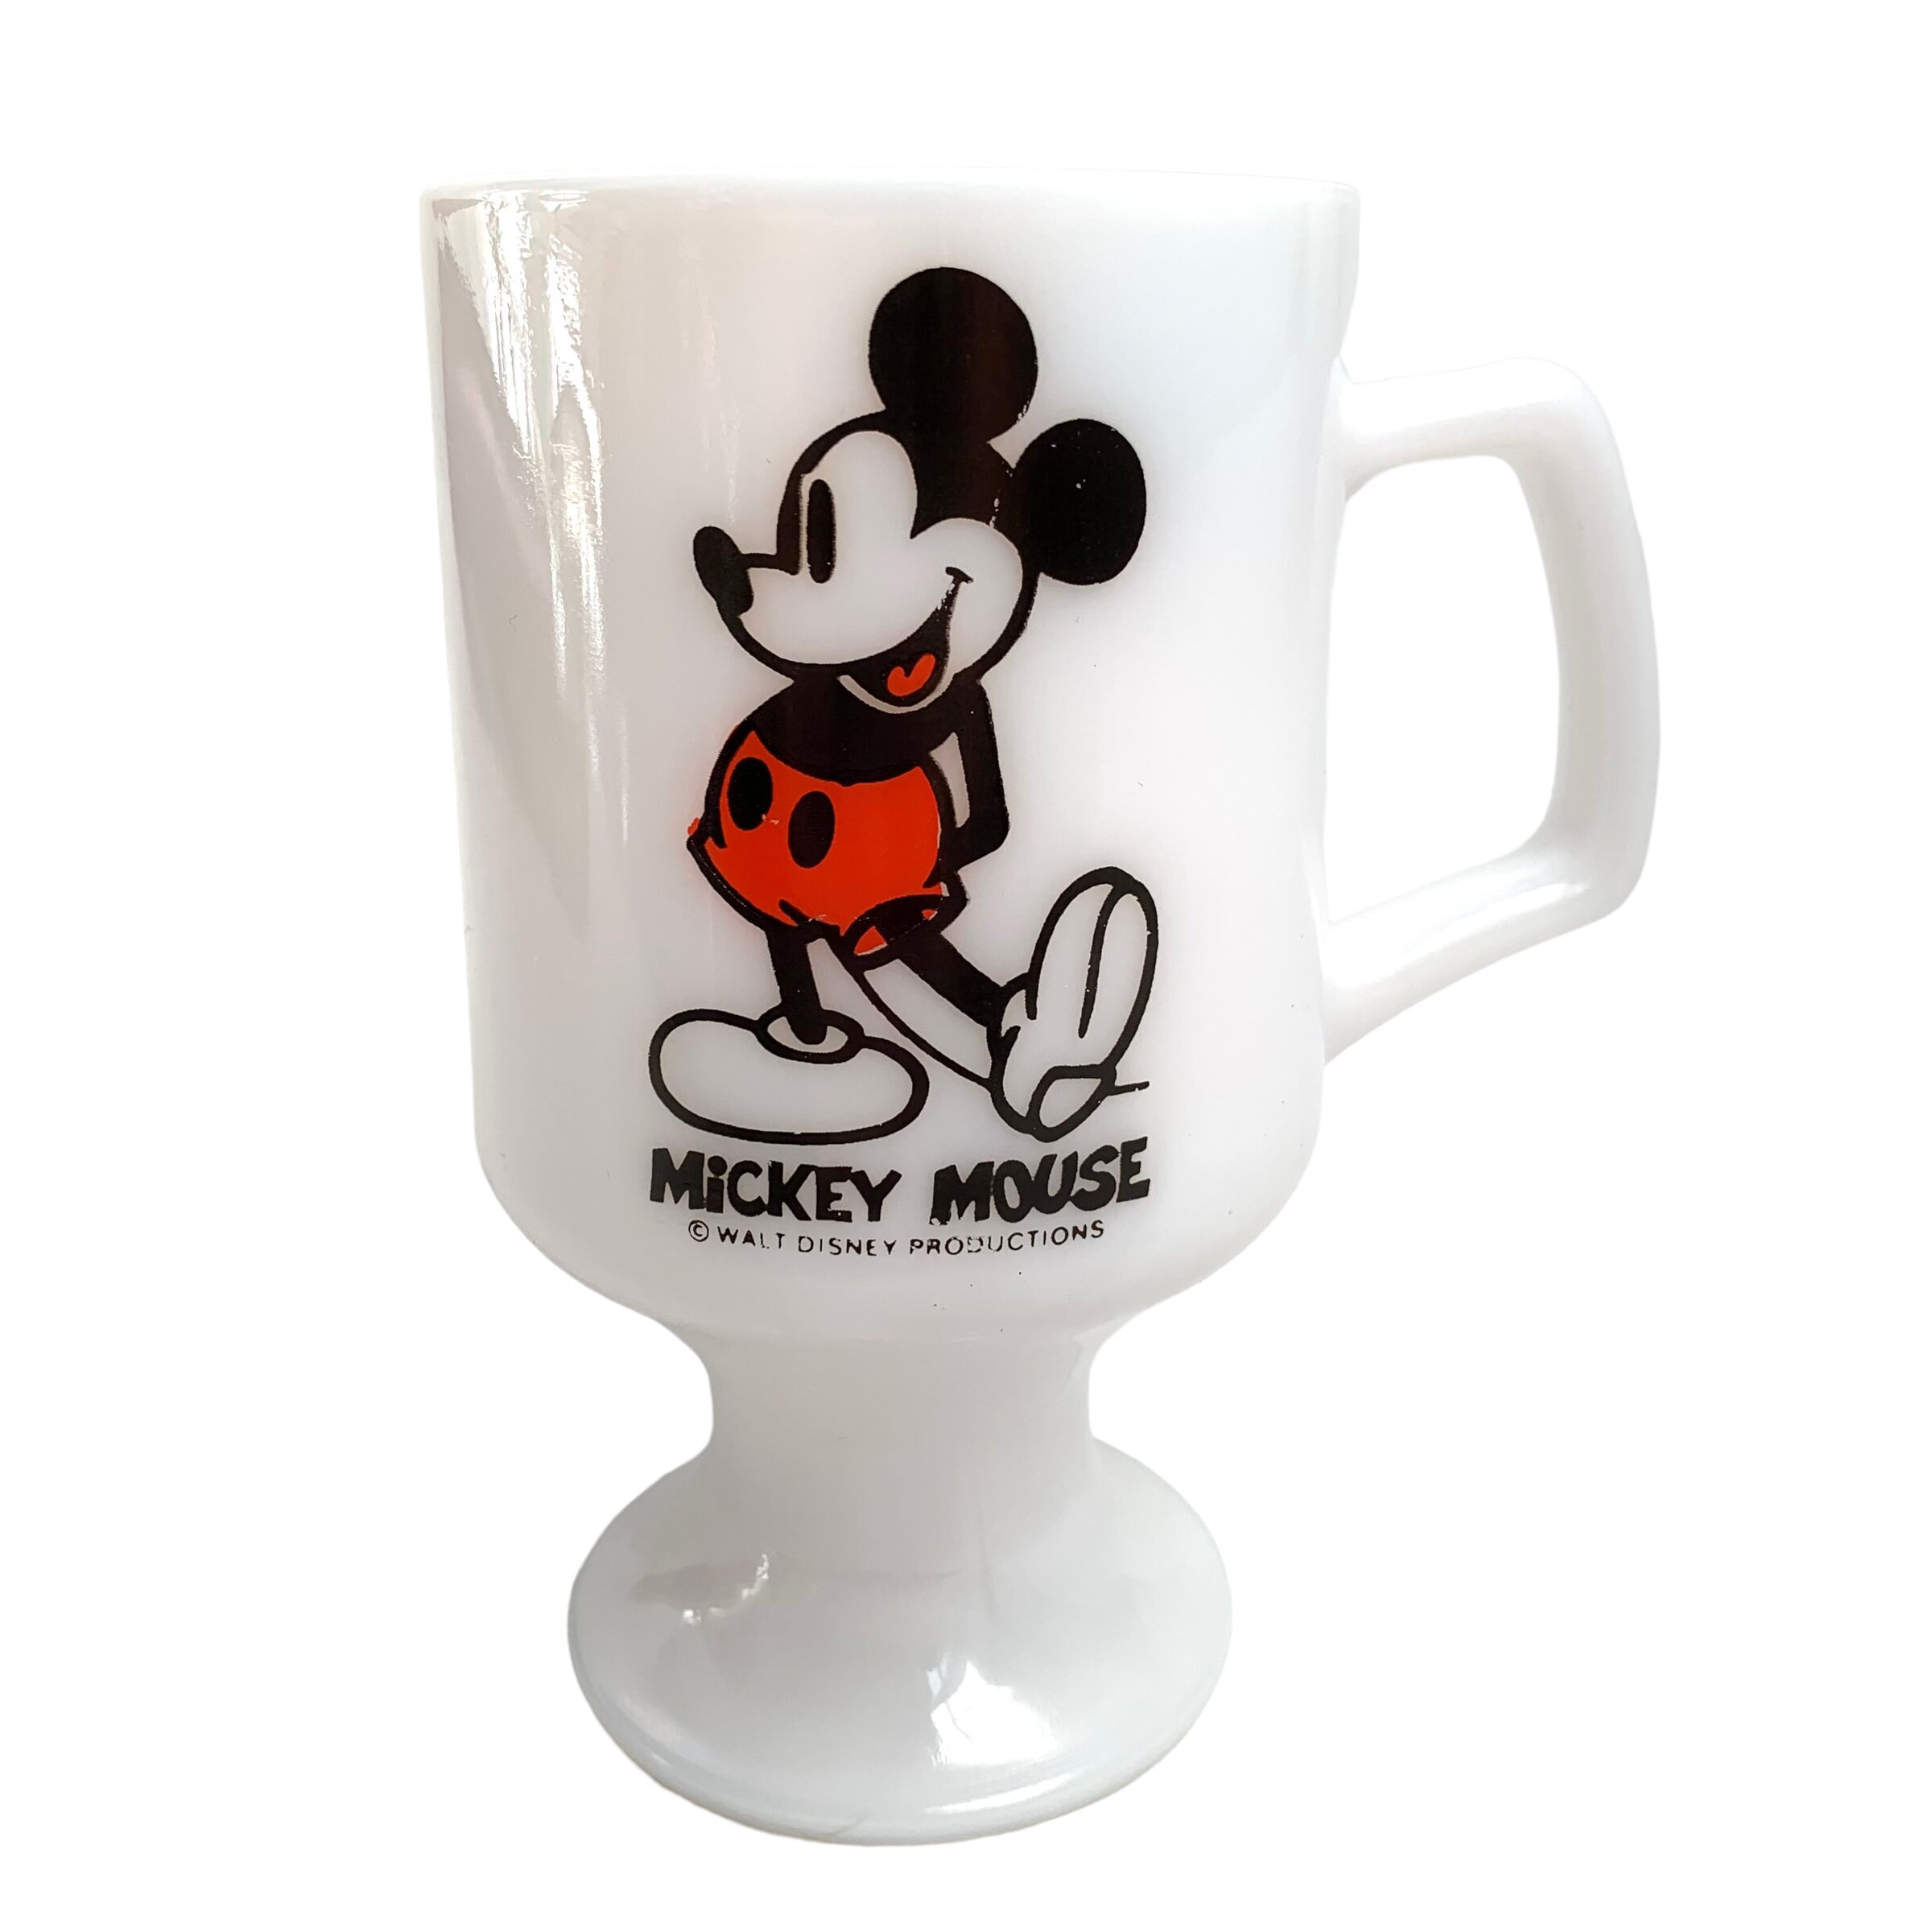 Disney Mickey Mouse Red Molded Mug with Arm